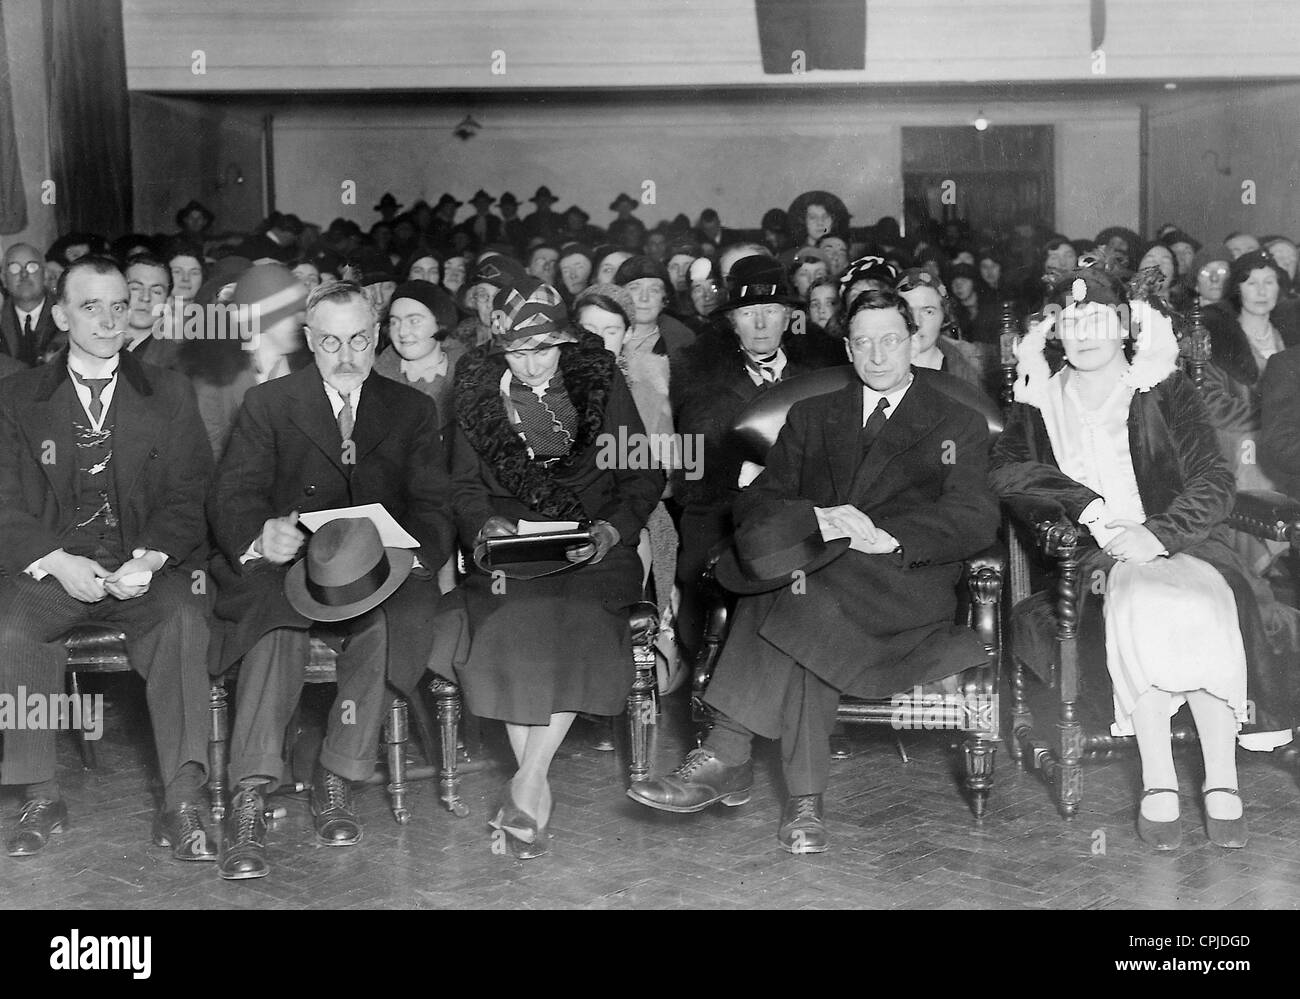 Eamon de Valera and his wife at a public event, 1932 Stock Photo